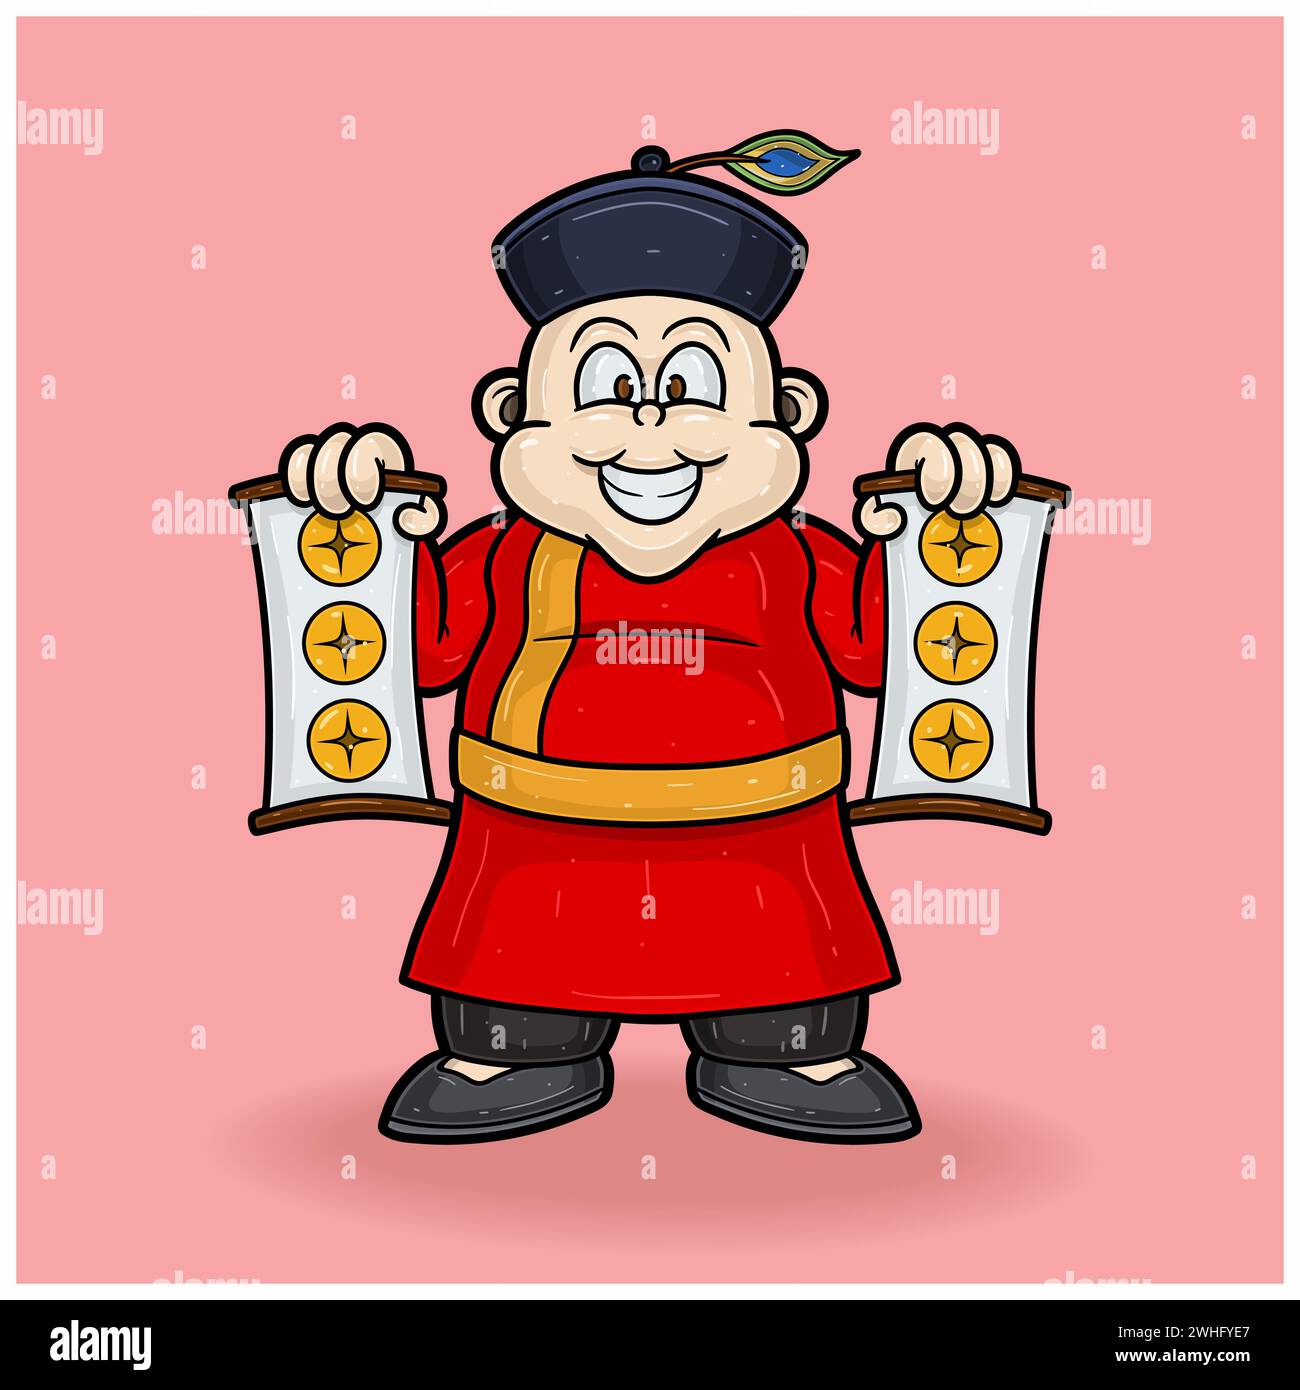 Mascot Character of Chinese Fat People With Money Symbol For New Year. Vector Illustrations. Stock Vector